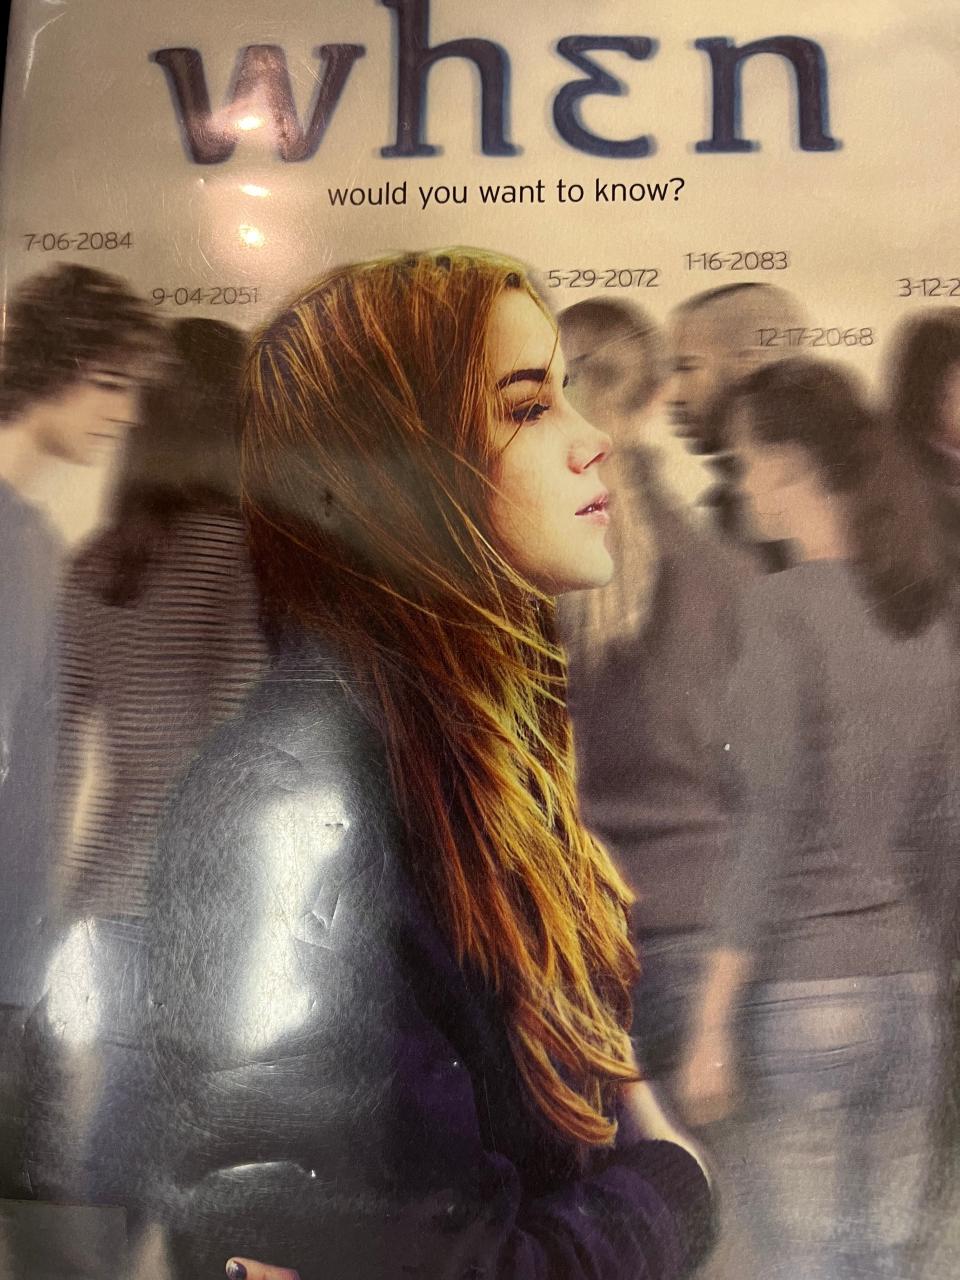 The book cover for "When," by Victoria Laurie.